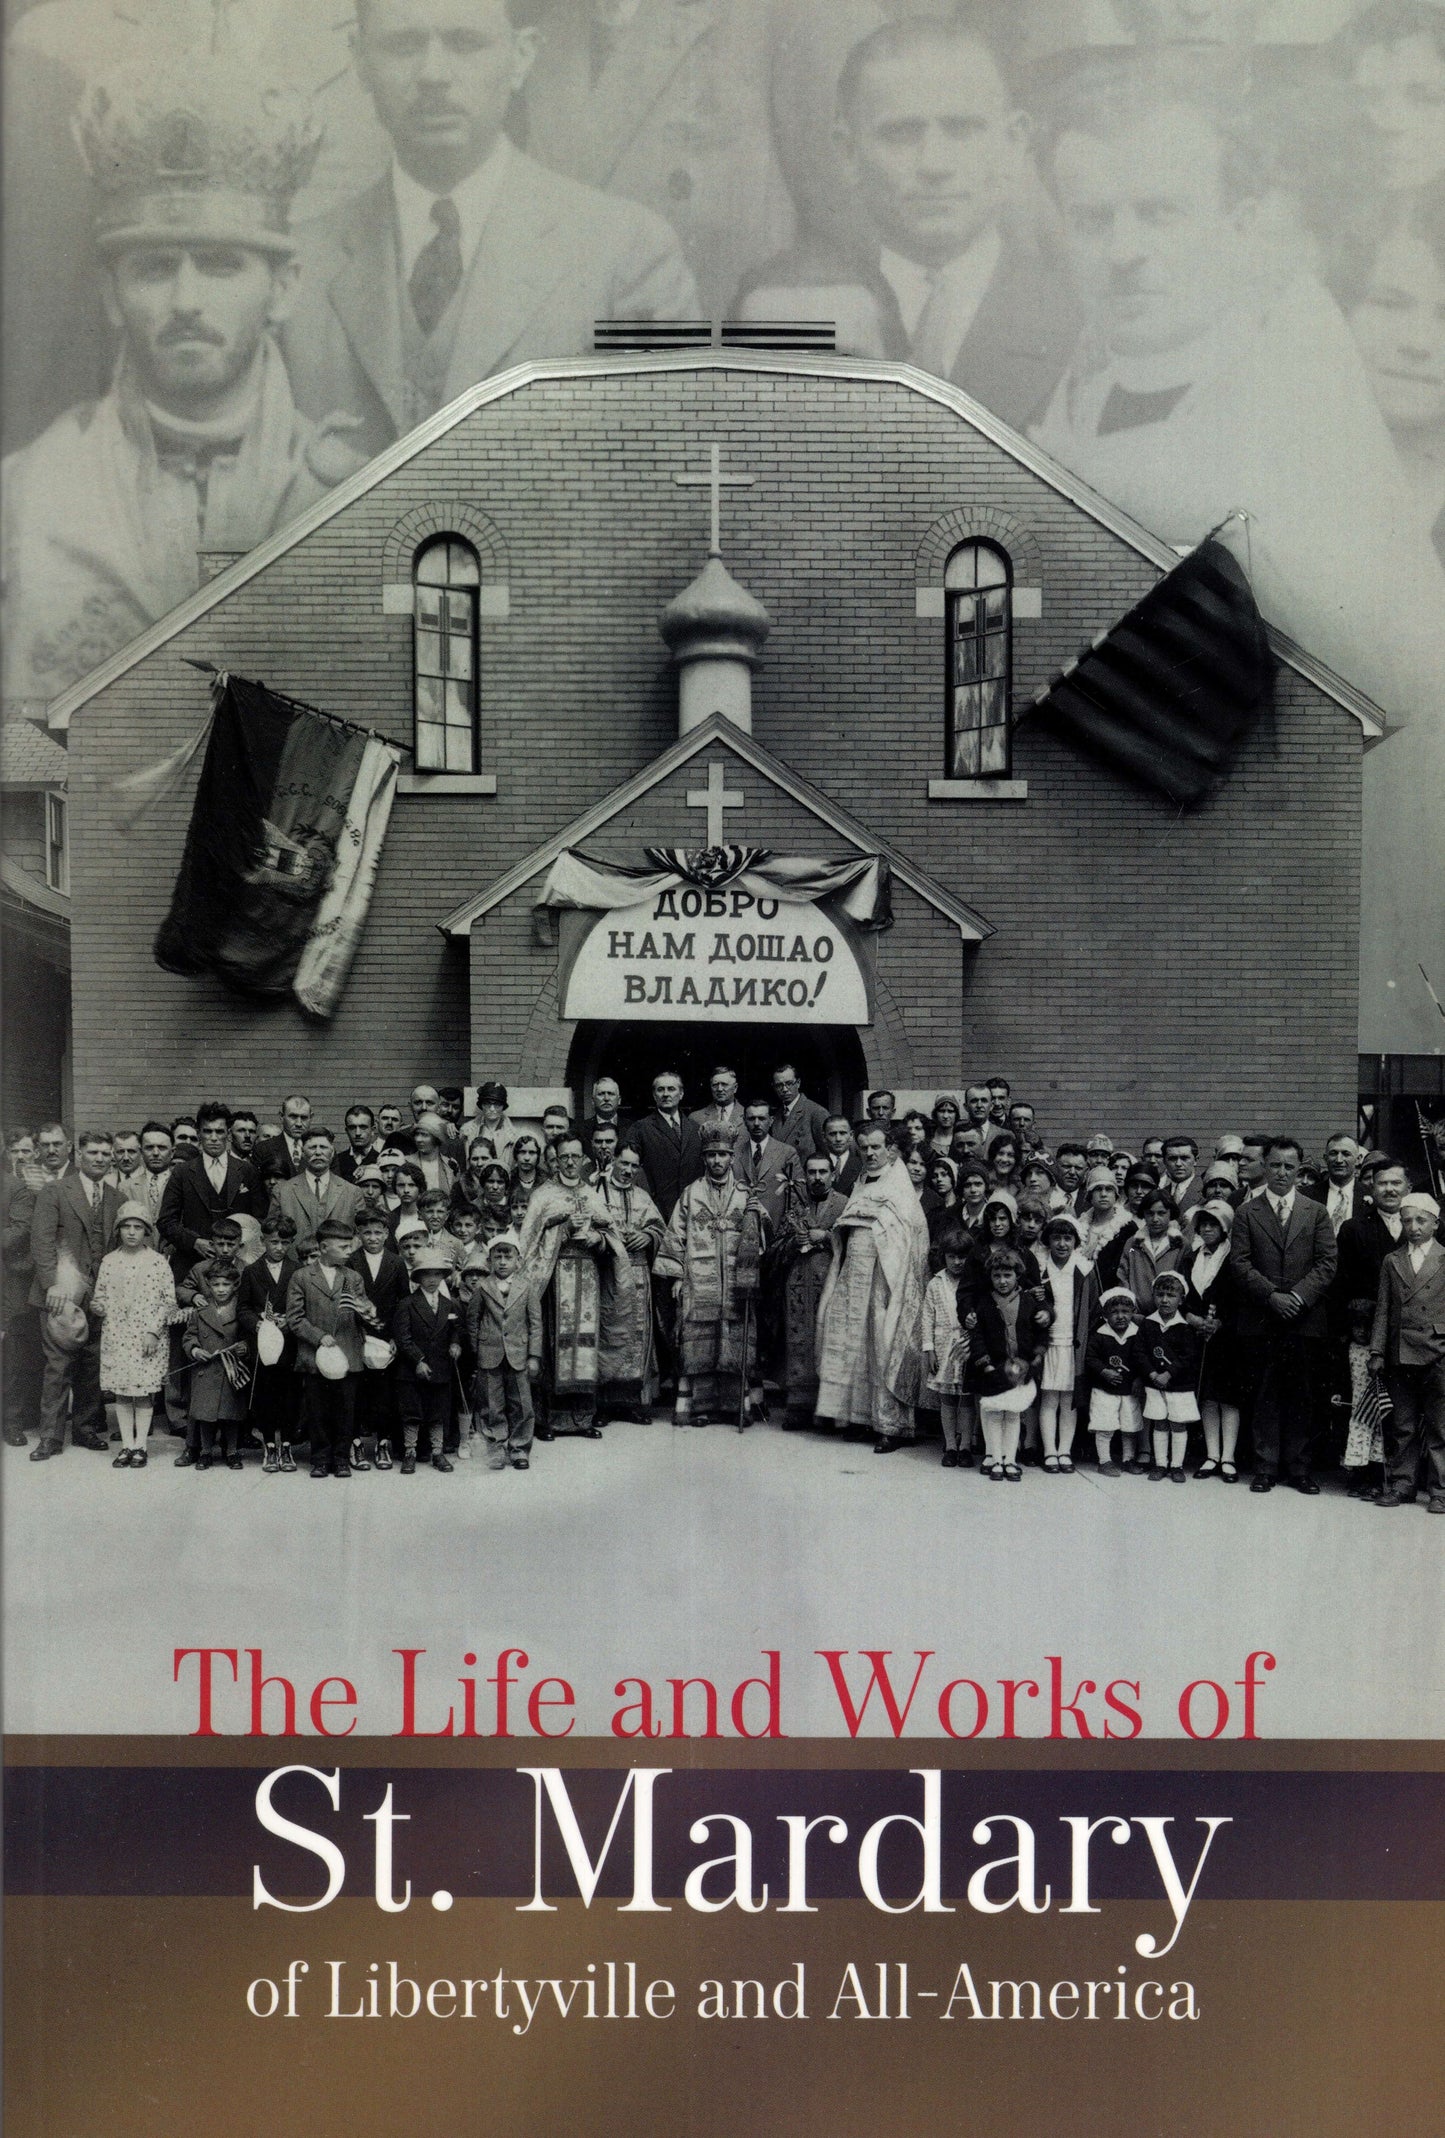 The Life and Works of St. Mardary of Libertyville